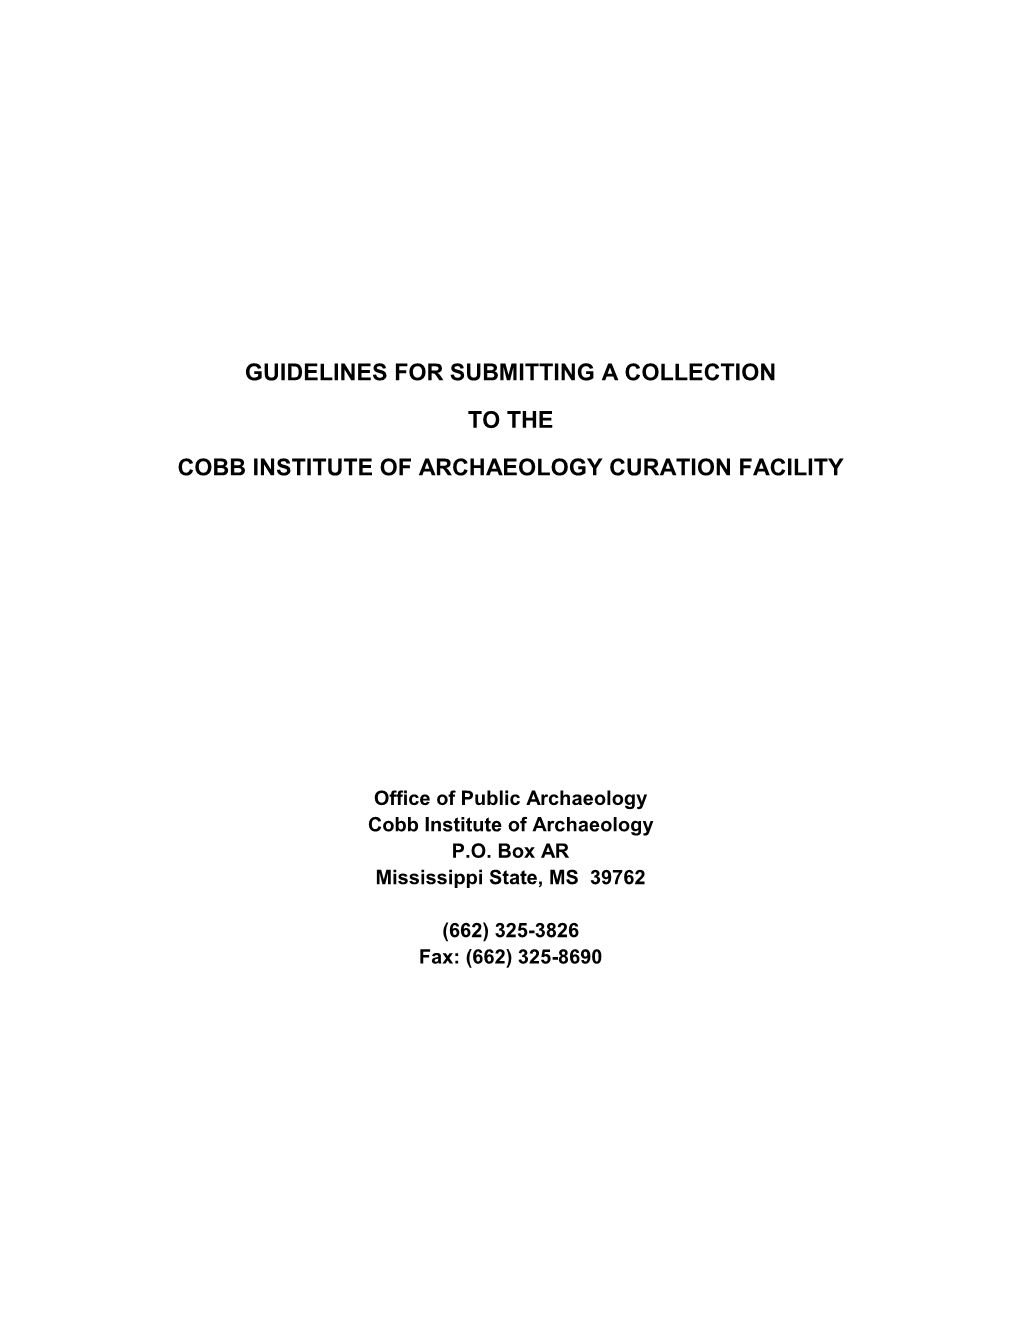 Guidelines for Submitting a Collection to the Cobb Institute of Archaeology Curation Facility